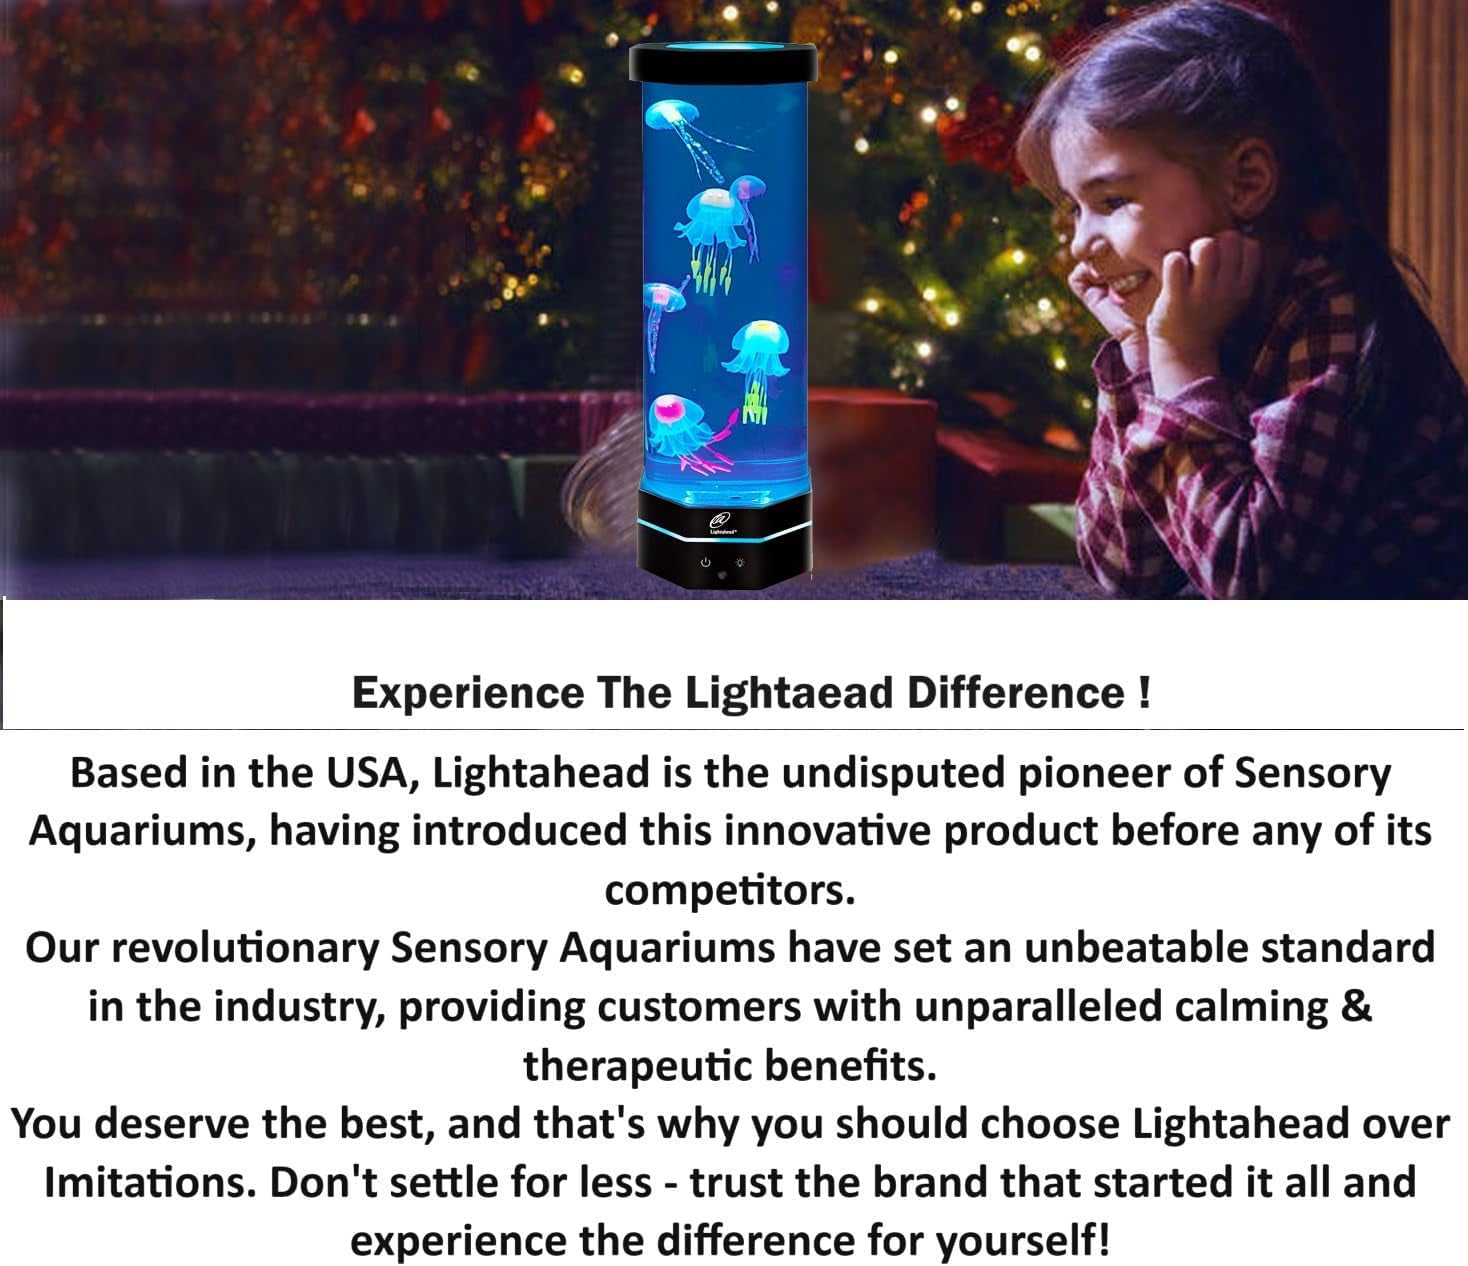 LED Desktop Jellyfish Lava Lamp with Color Changing Light Effects. a Sensory Synthetic Jelly Fish Tank Aquarium Mood Lamp. Excellent Gift